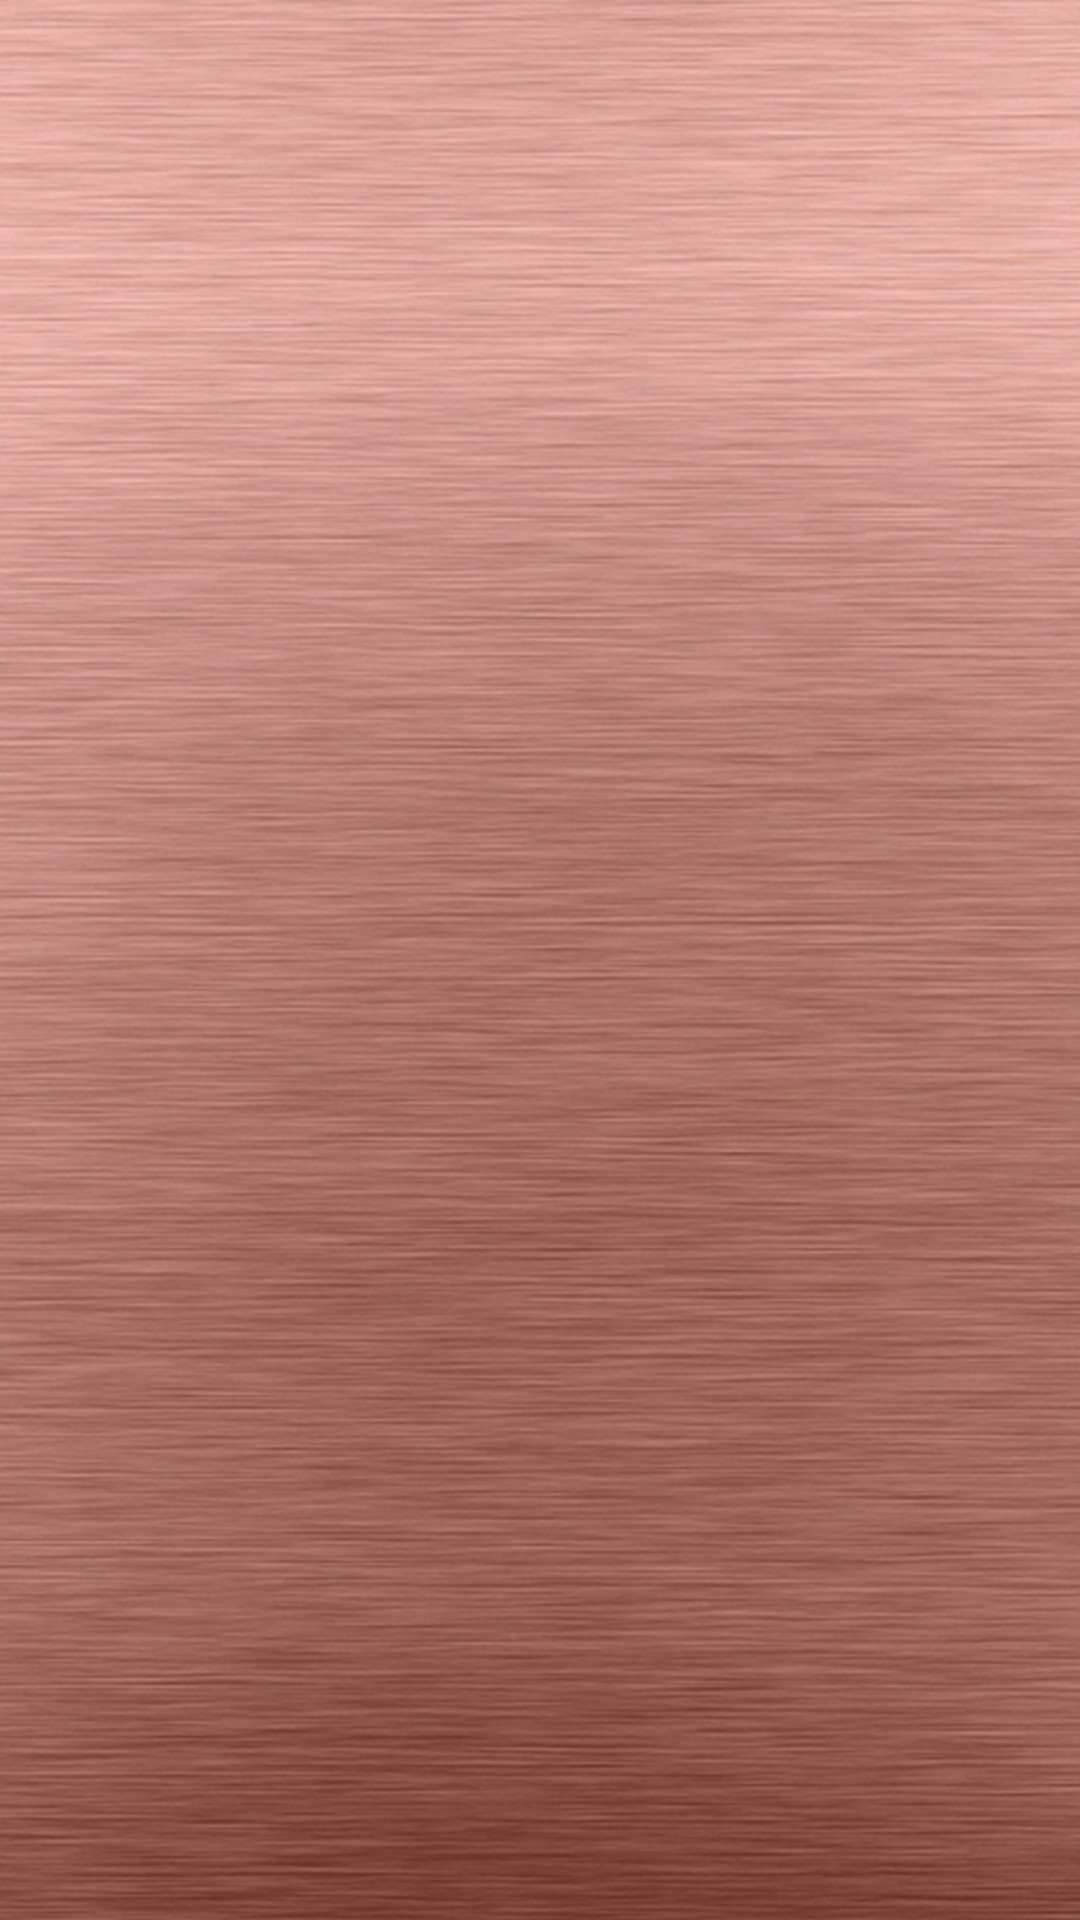 Wallpaper Android Rose Gold High Resolution 1080X1920